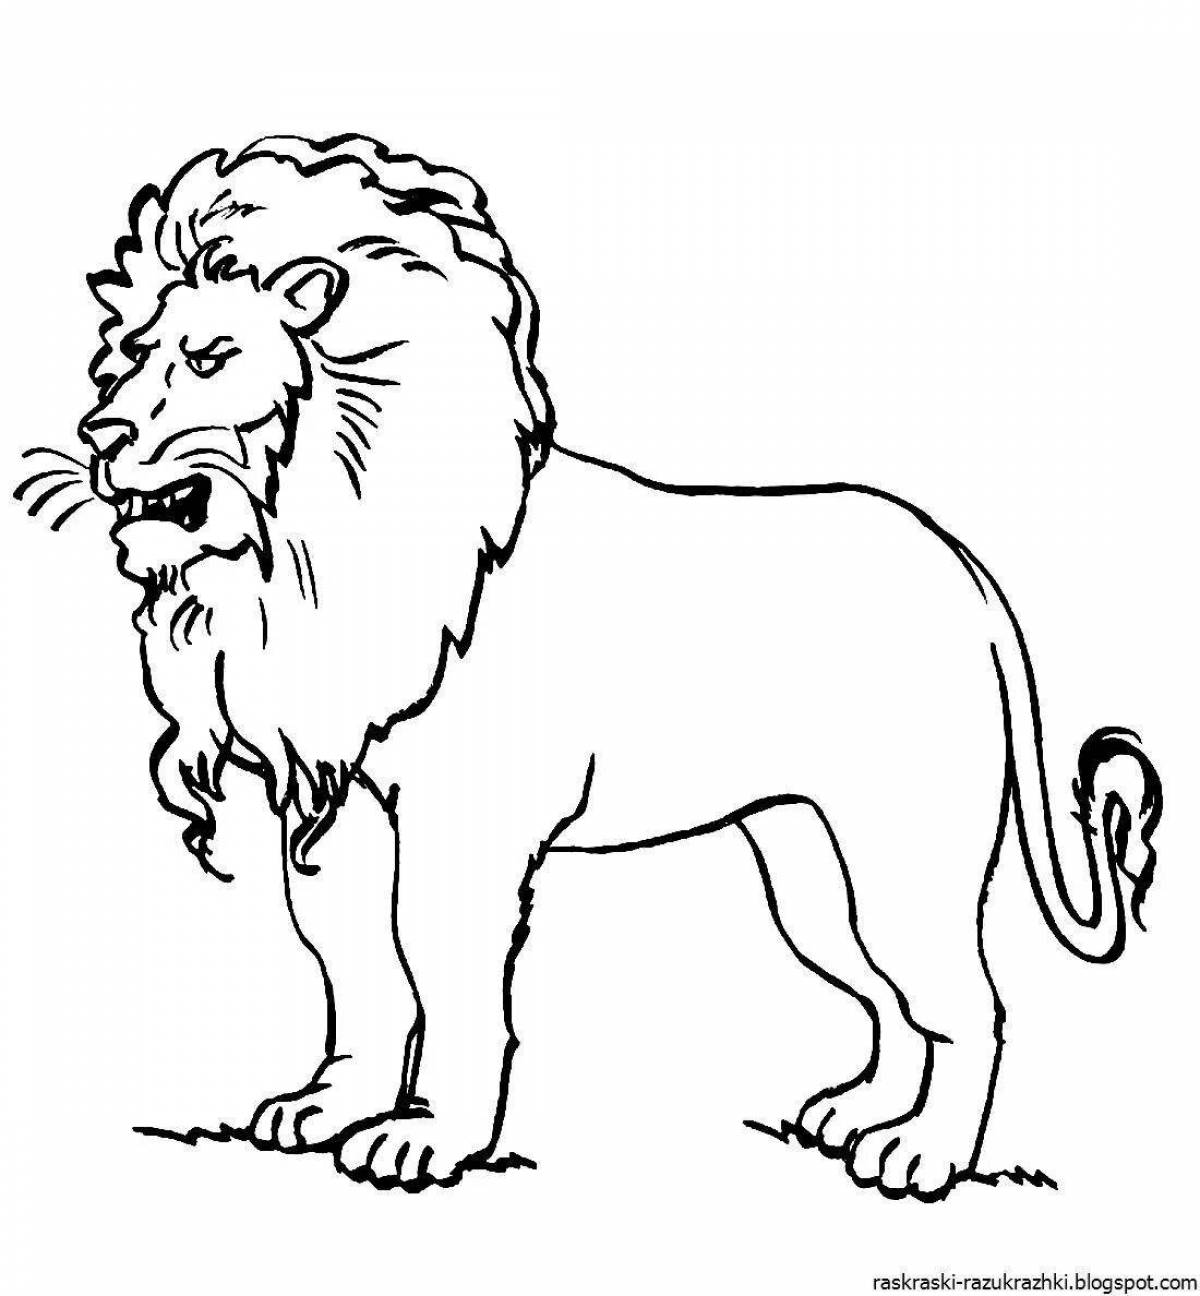 Art drawing of a lion for children